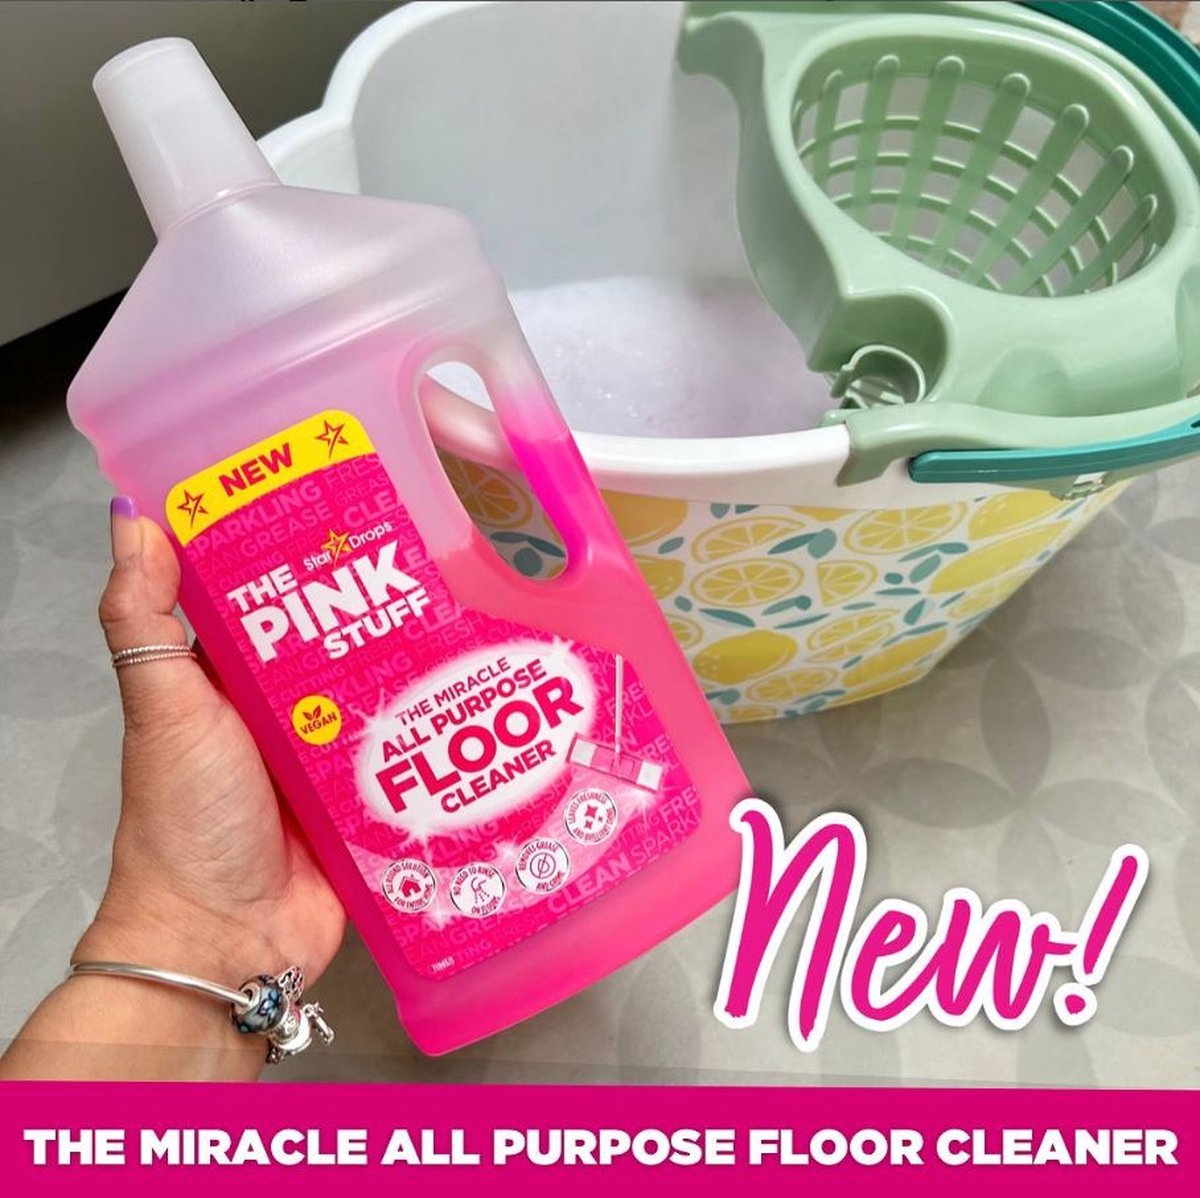 The Pink Stuff - 2x 750 ml - Nettoyant WC Stardrops Wonder - THE Wonder  Cleaner - The Miracle Cleaner